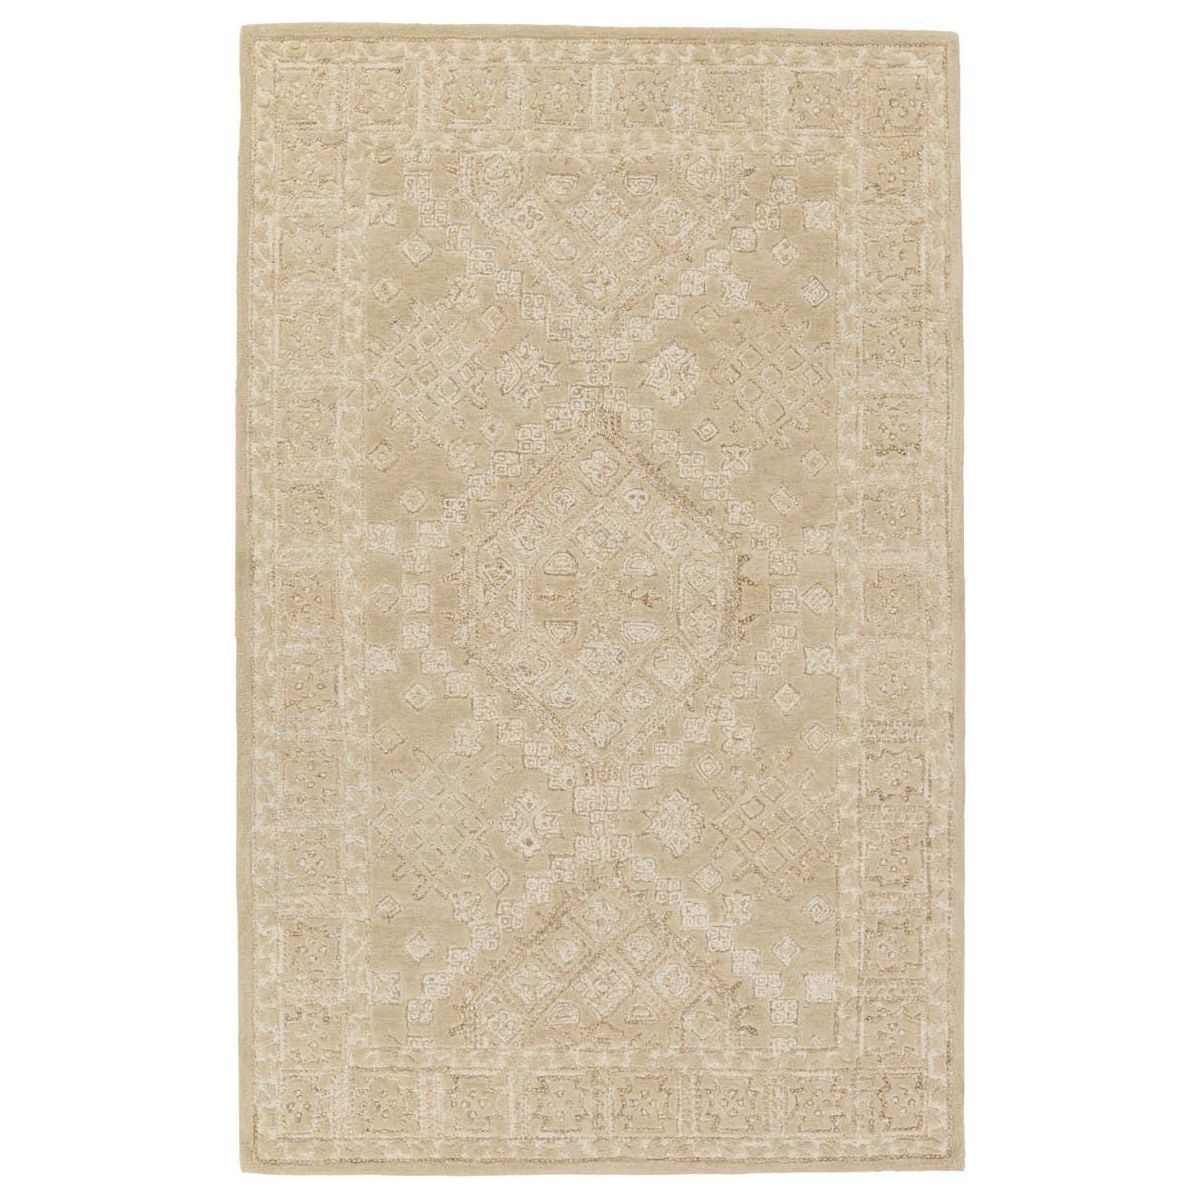 The Farryn Tomoes boasts masterfully hand-tufted designs with stunning detail and versatile colorways. The Tomoe rug features a tribal-inspired center medallion in warm hues of tan and cream. This transitional design is crafted of durable wool and complements a variety of styles, from global to rustic decor. Amethyst Home provides interior design, new home construction design consulting, vintage area rugs, and lighting in the Miami metro area.